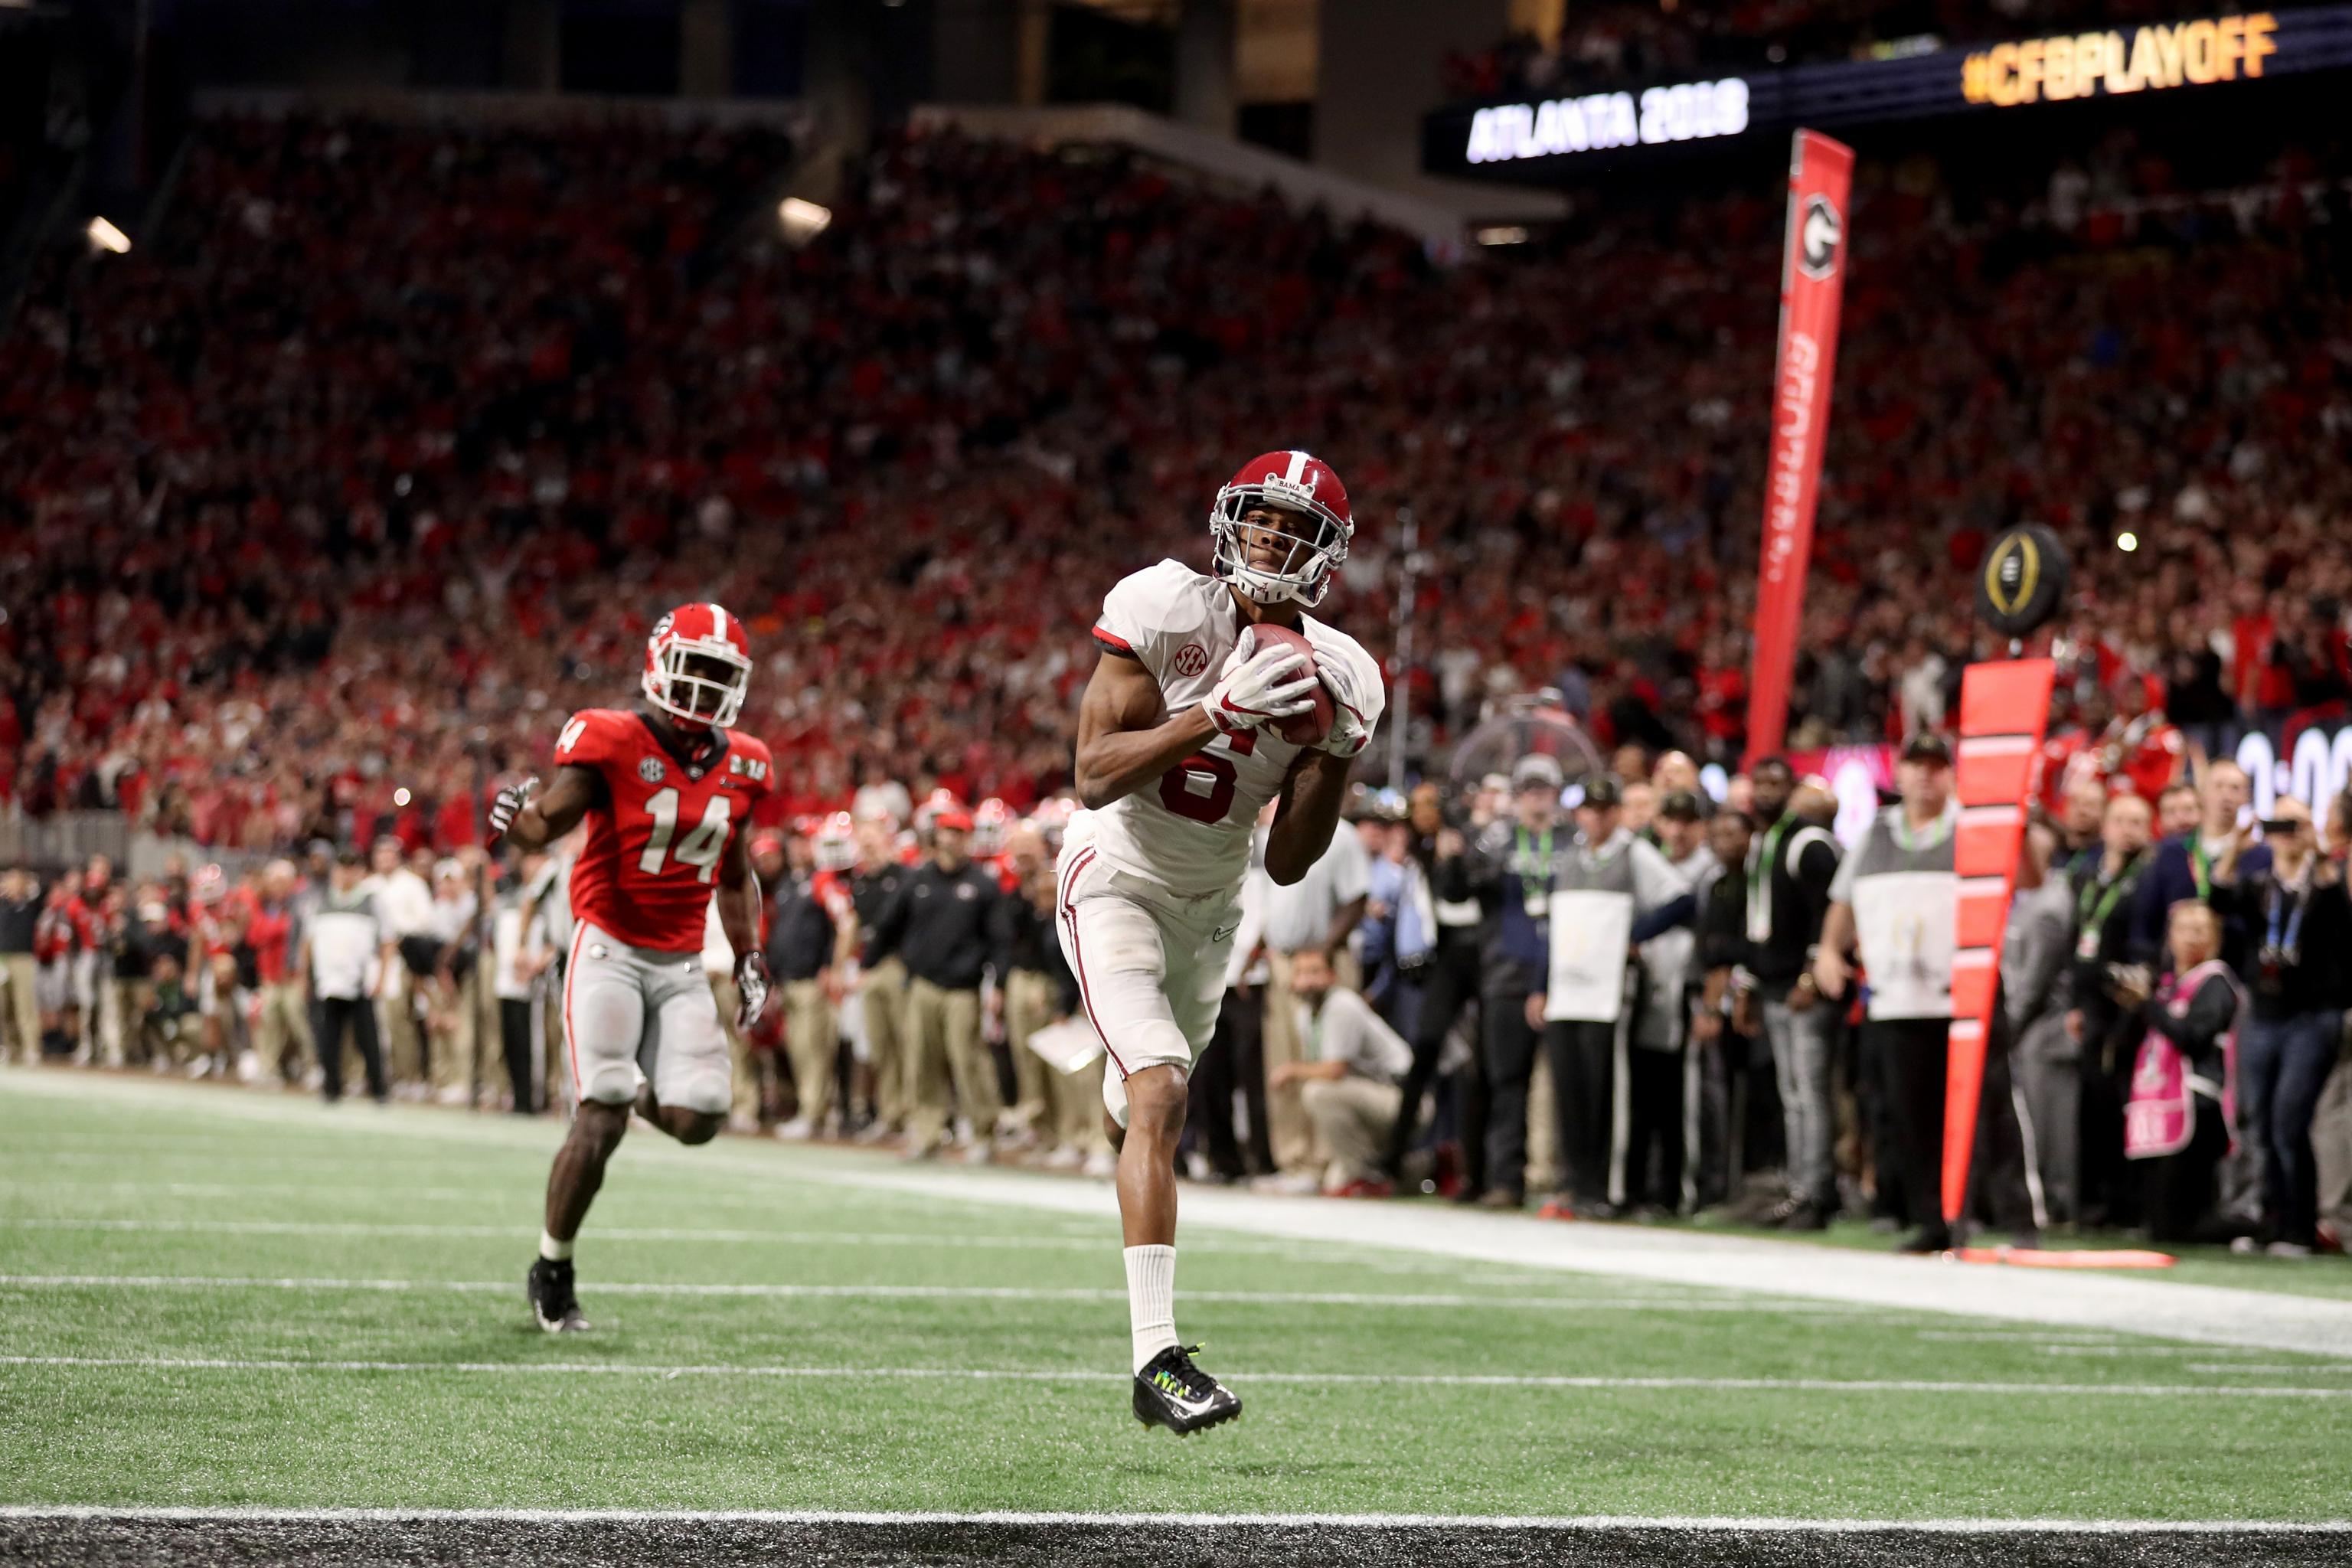 Alabama vs. Georgia: Top Plays, Highlights from 2018 CFP Championship | News, Scores, Stats, and Rumors | Bleacher Report